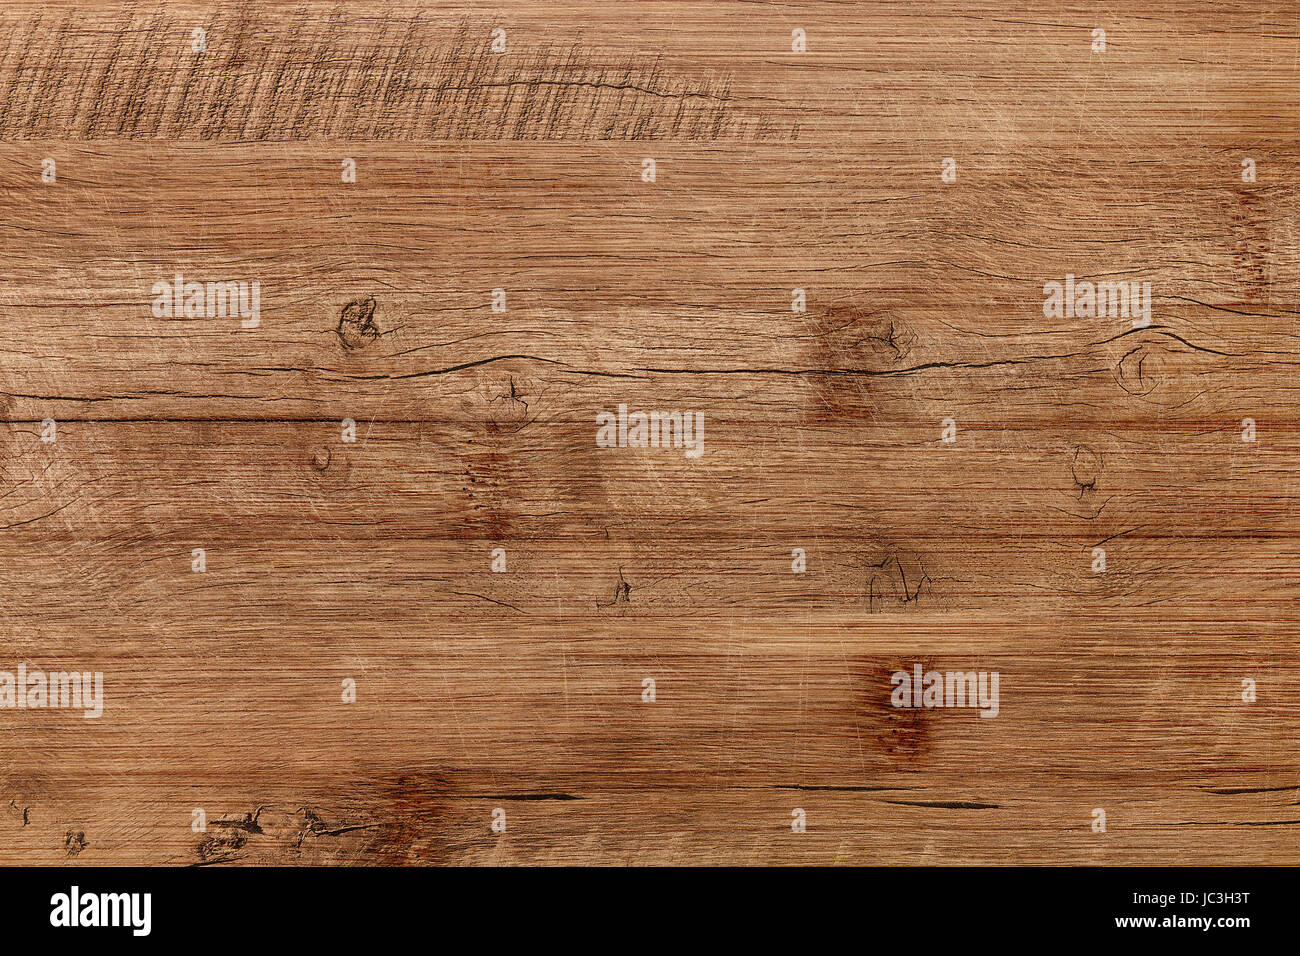 Wood texture. Old wooden plank wall background for design and decoration Stock Photo